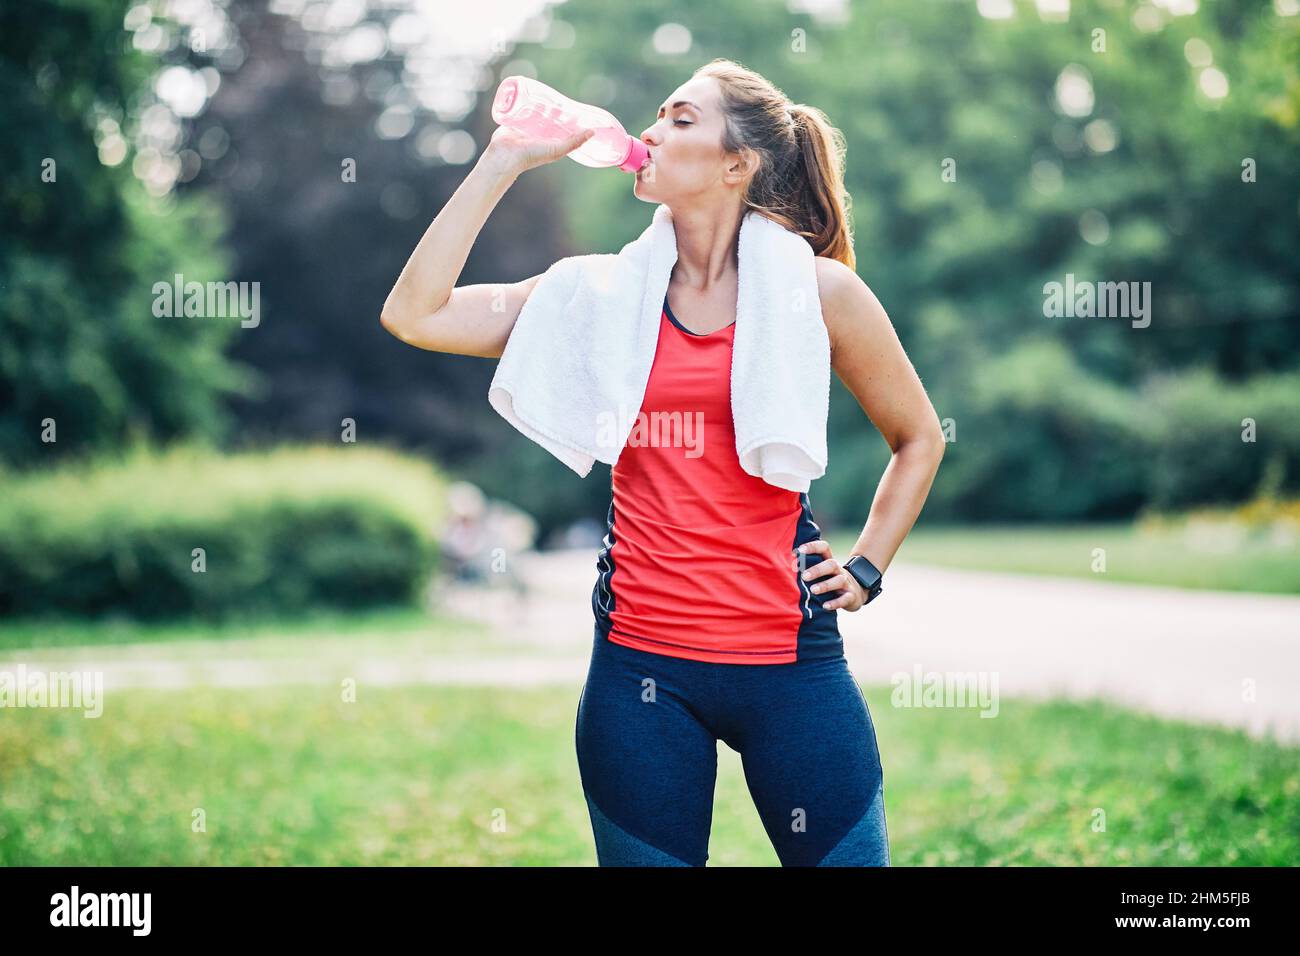 fitness woman park exercise lifestyle outdoor sport healthy female nature active young water drinking Stock Photo